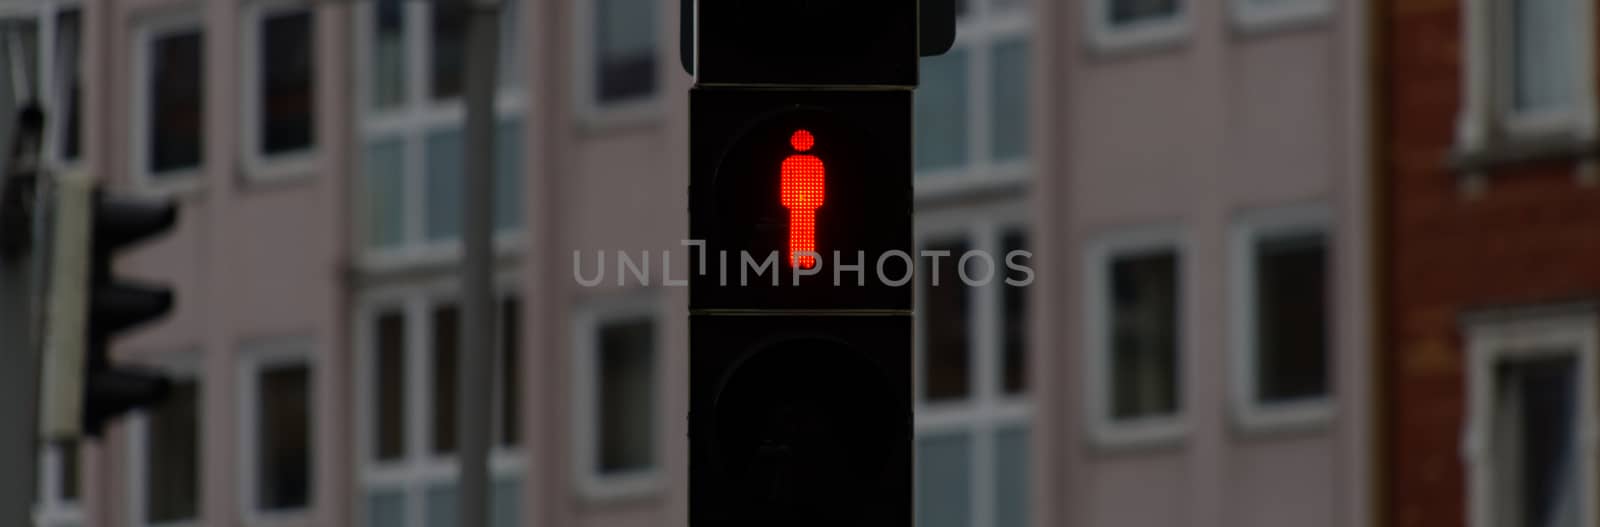 Standstill, red traffic light for pedestrians to stop sign and stop walking, background is blurred by fading depth of field. by geogif